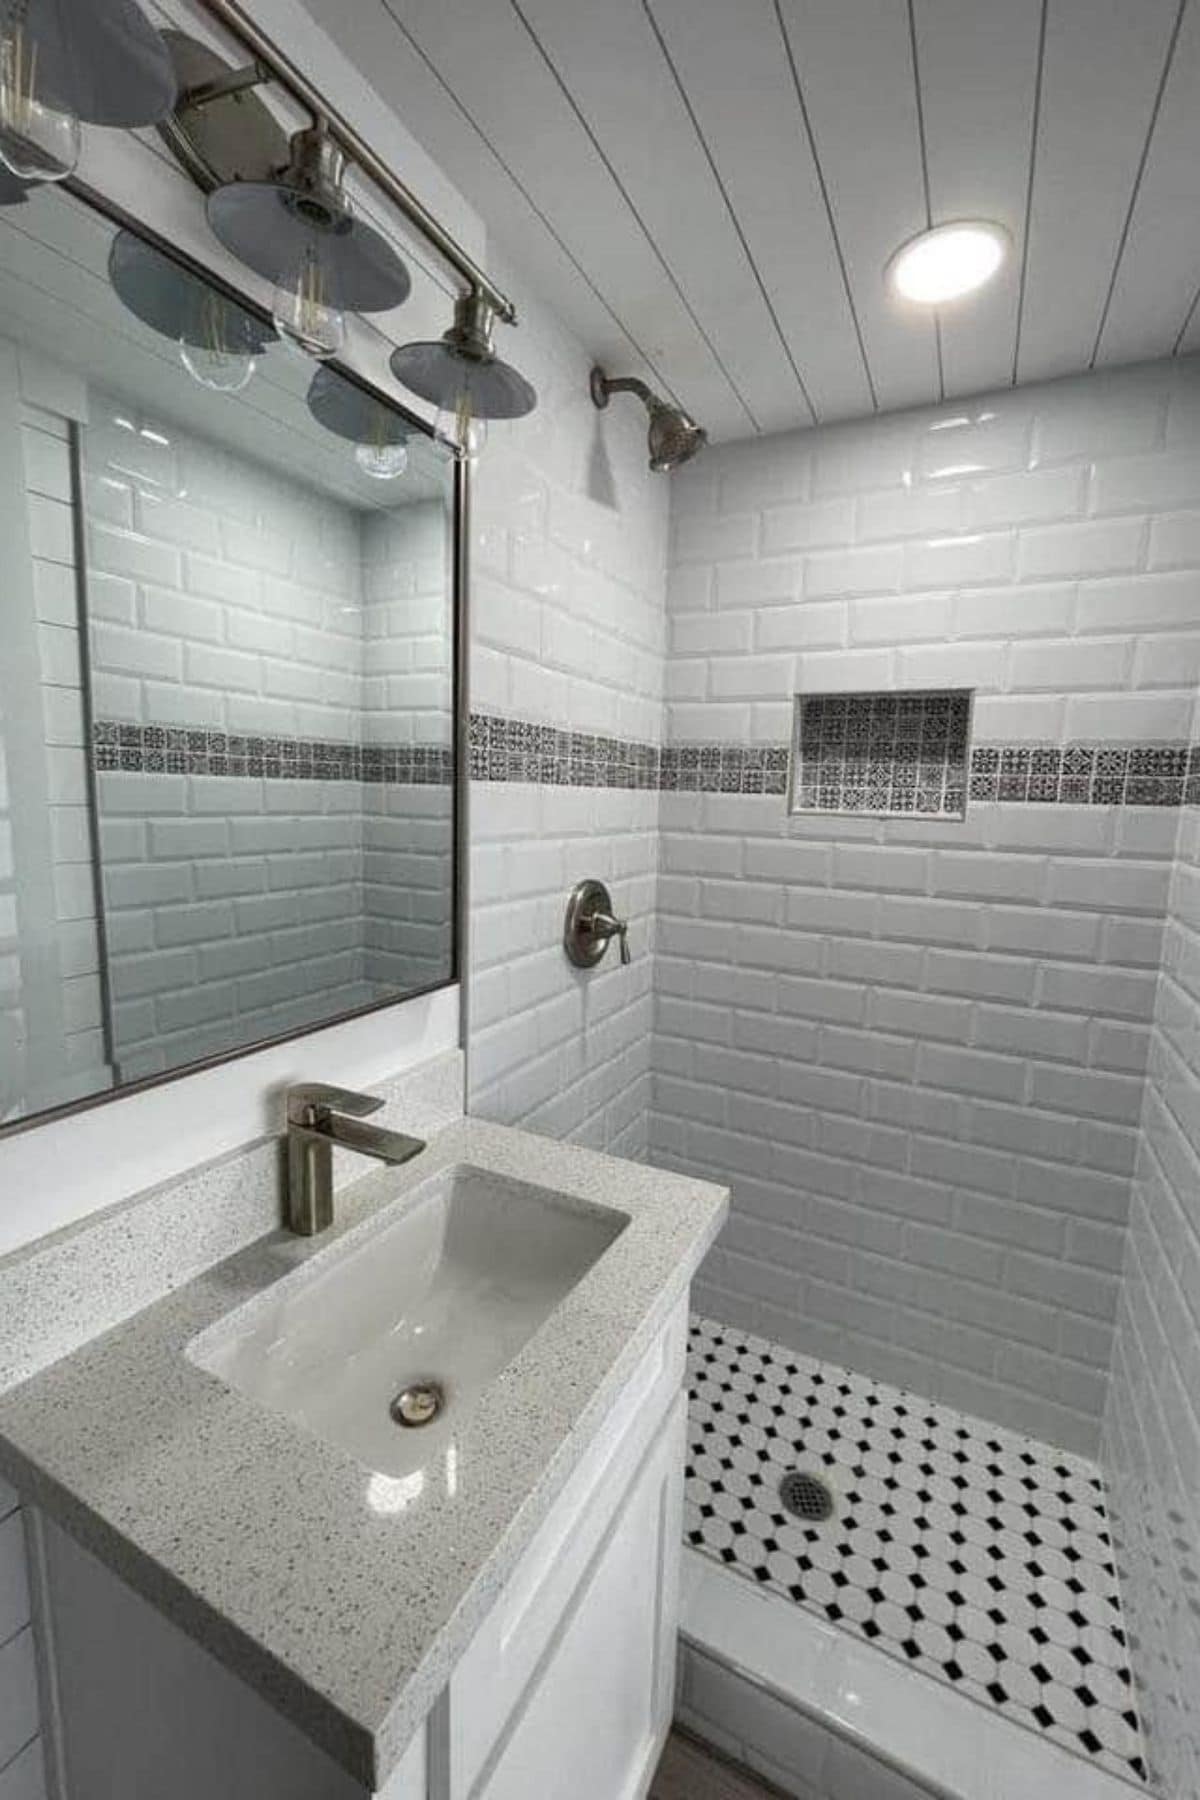 Walk in tiled shower with white and gray tile